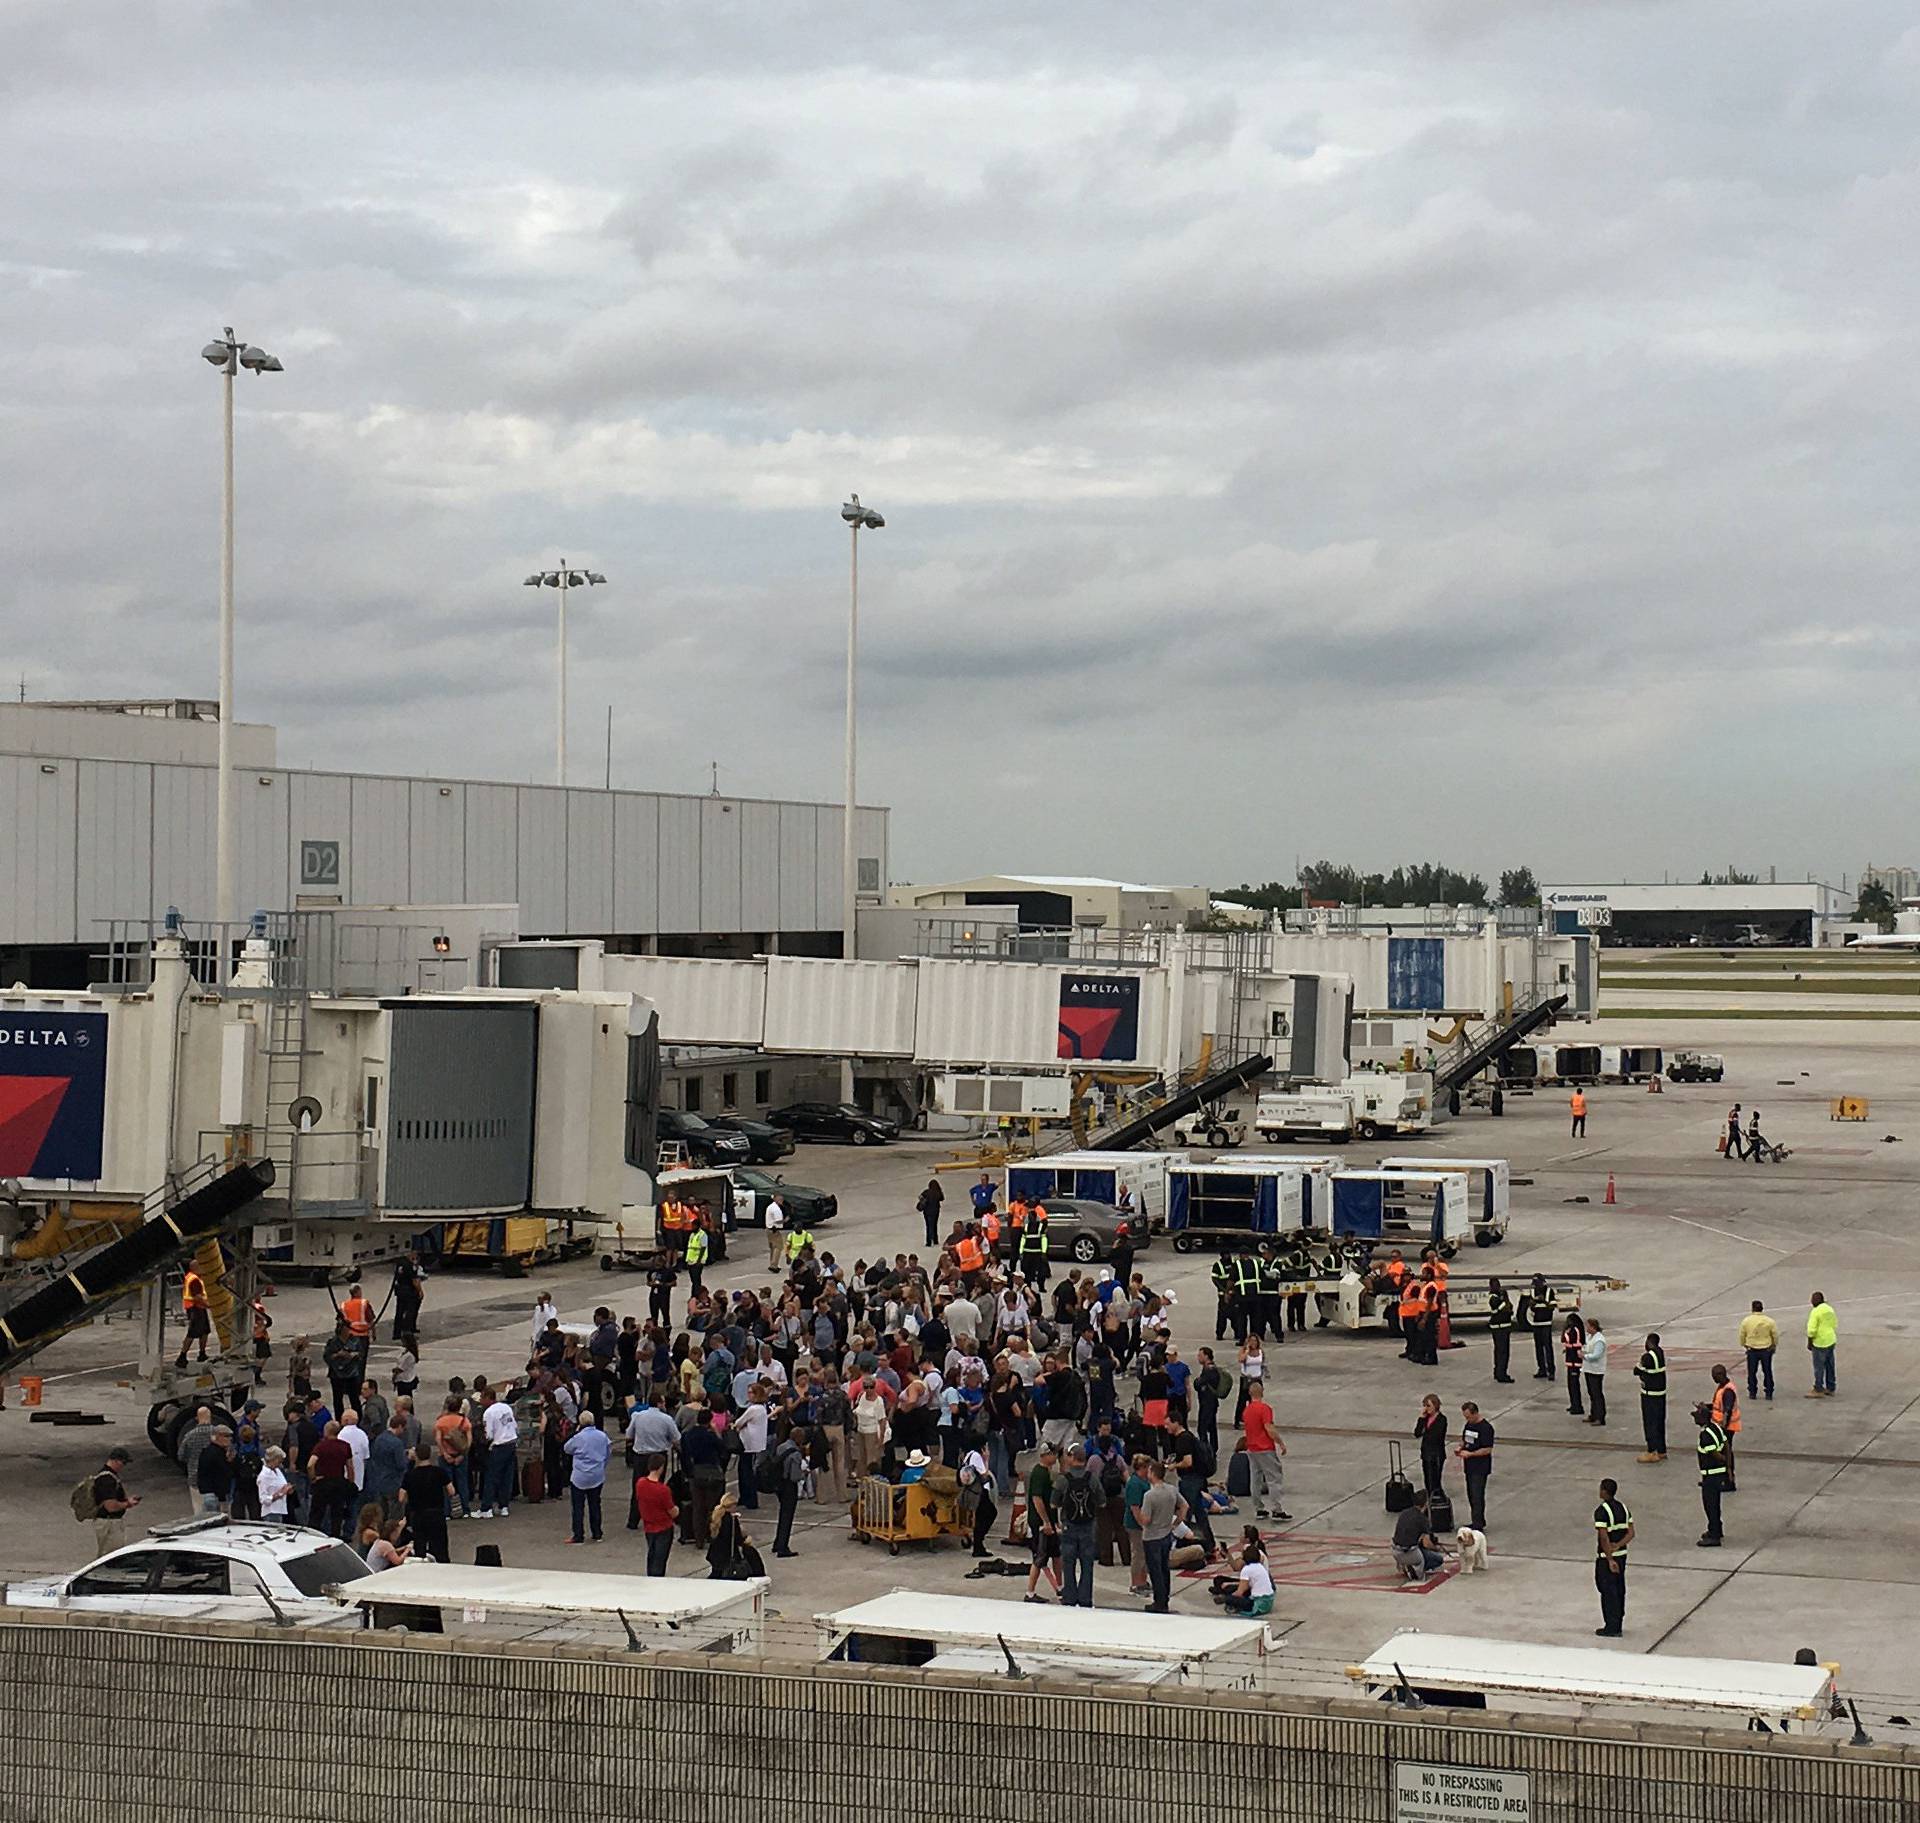 Travelers are evacuated out of the terminal and onto the tarmac after airport shooting at Fort Lauderdale-Hollywood International Airport in Florida